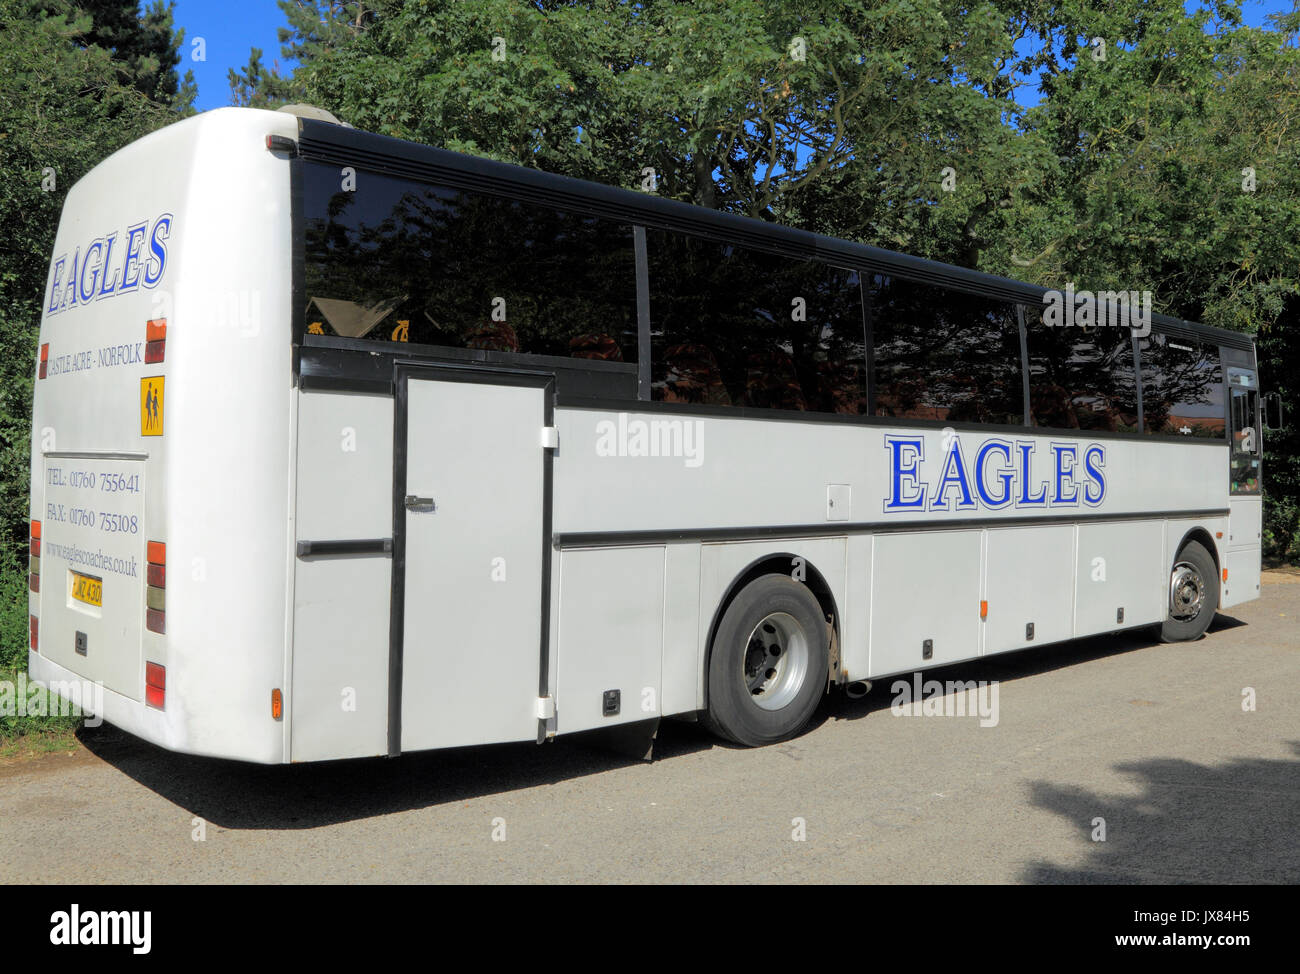 Eagles Coaches, coach, day trips, trips, excursion, excursions, holidays, transport, travel company, companies, England, UK Stock Photo